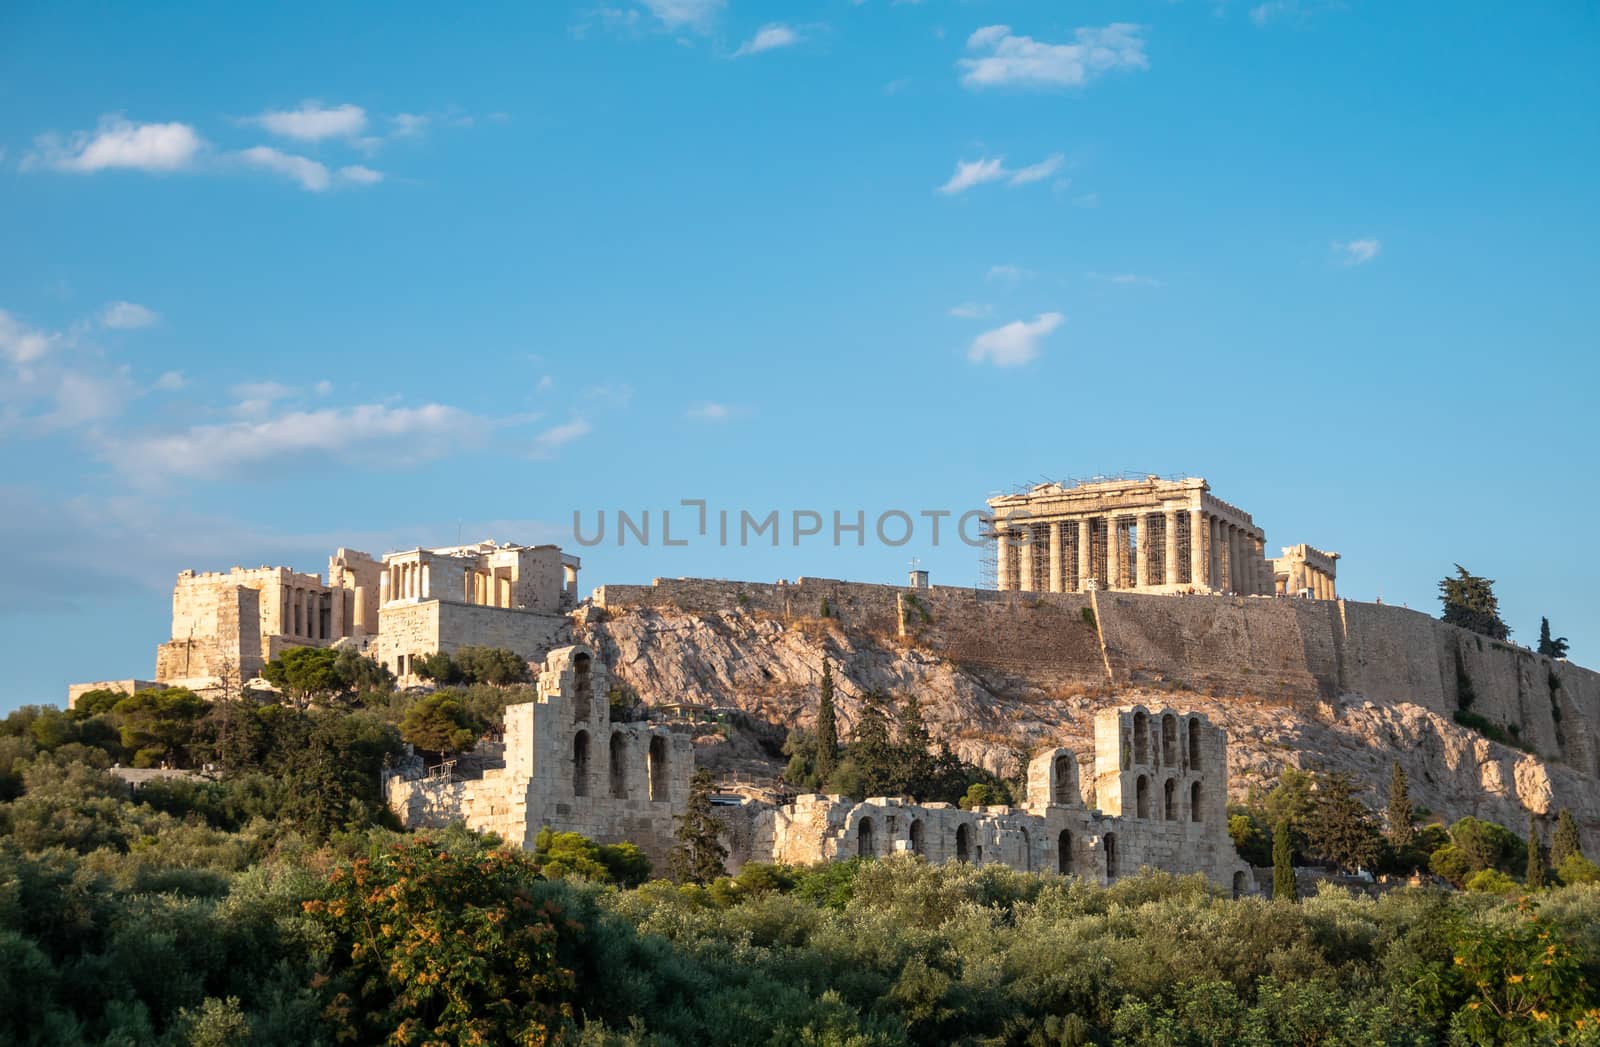 The Acropolis is in Greece.